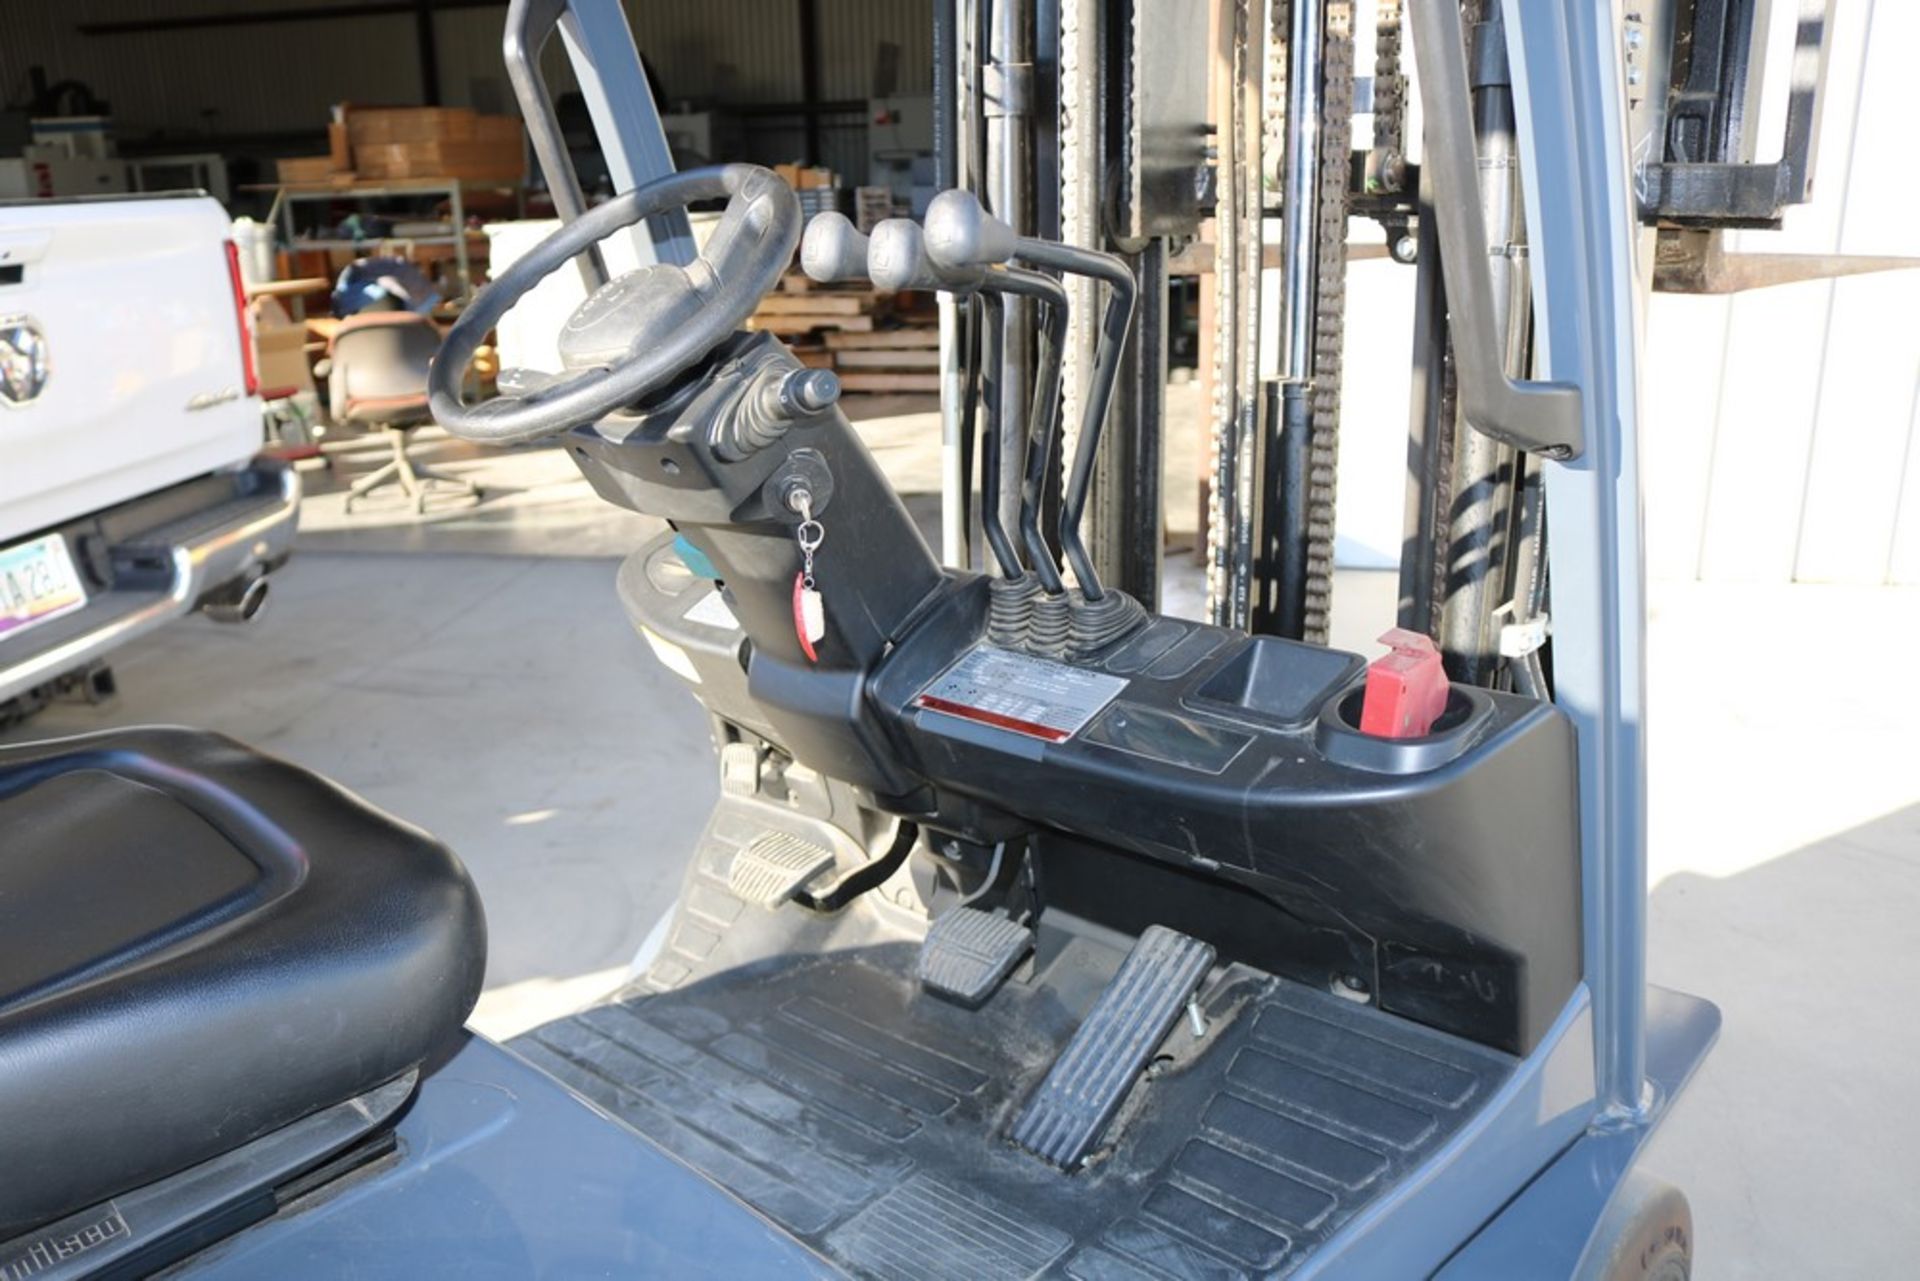 2016 Toyota Forklift Truck 4,500 lbs Capacity, 92 Hours, Side Shift, 5' Forks, Propane - Image 8 of 9